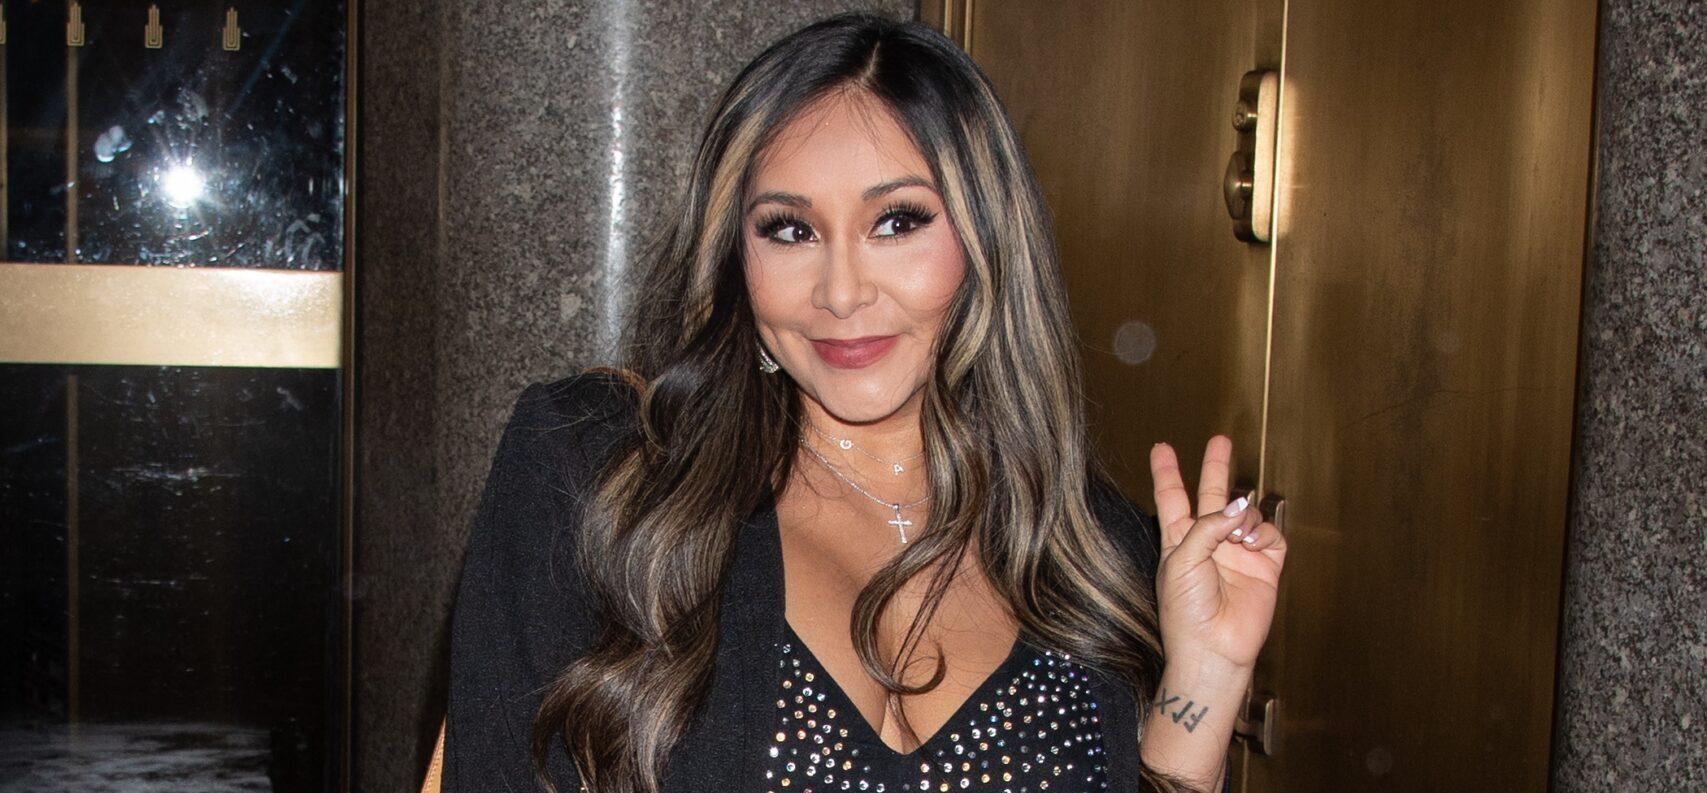 Nicole ‘Snooki’ Polizzi’s Highly Anticipated Podcast With ‘Jersey Shore’ Co-Star Gets Release Date!